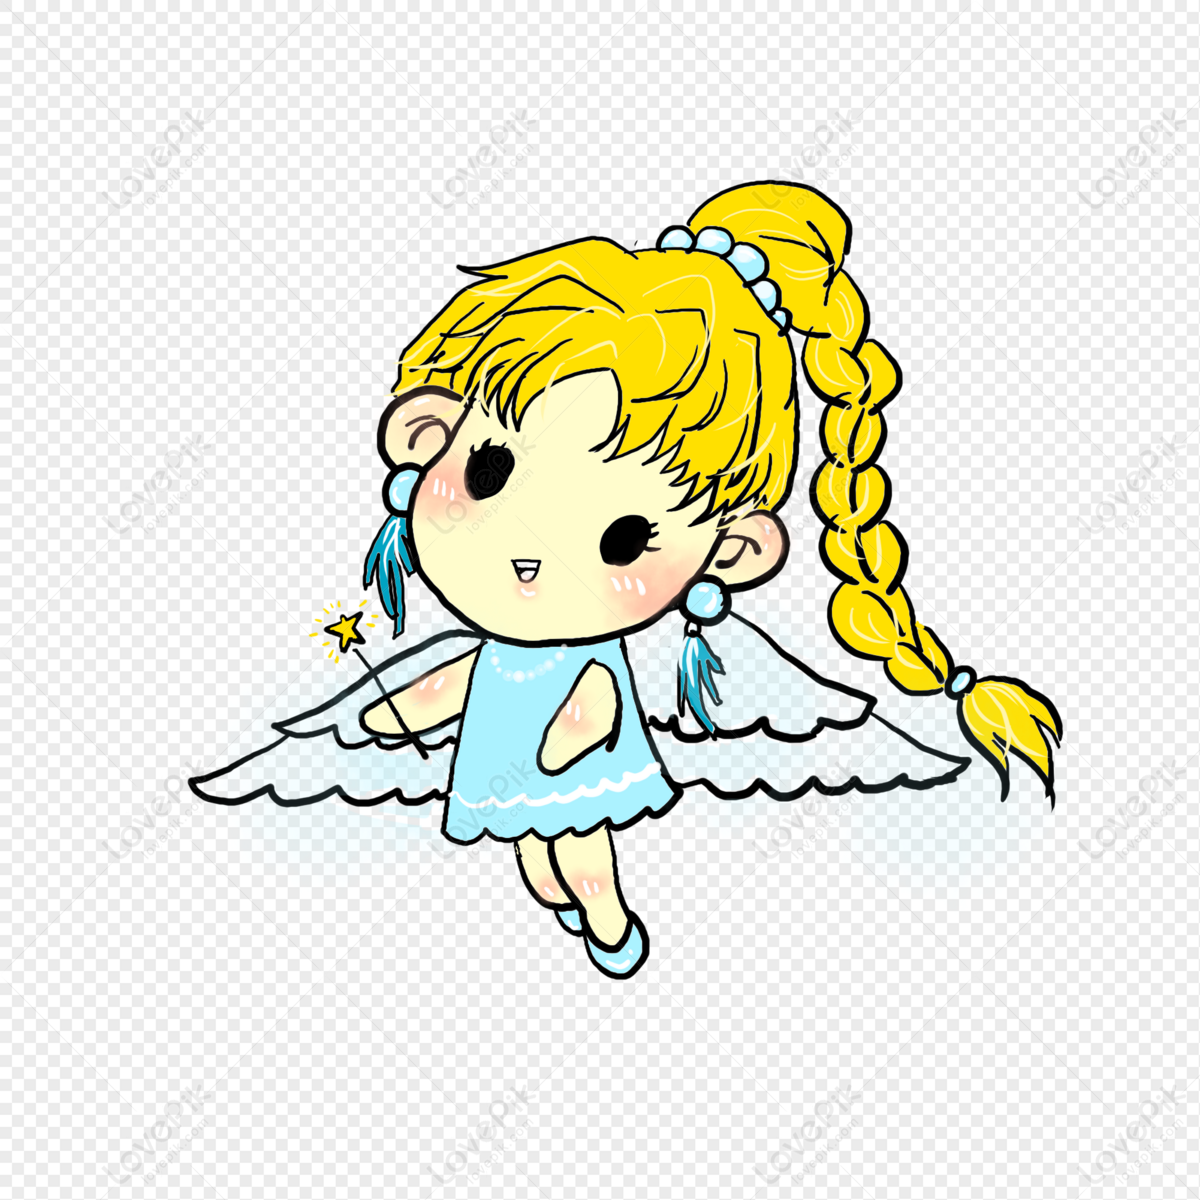 Little Angel Free PNG And Clipart Image For Free Download - Lovepik |  401146939